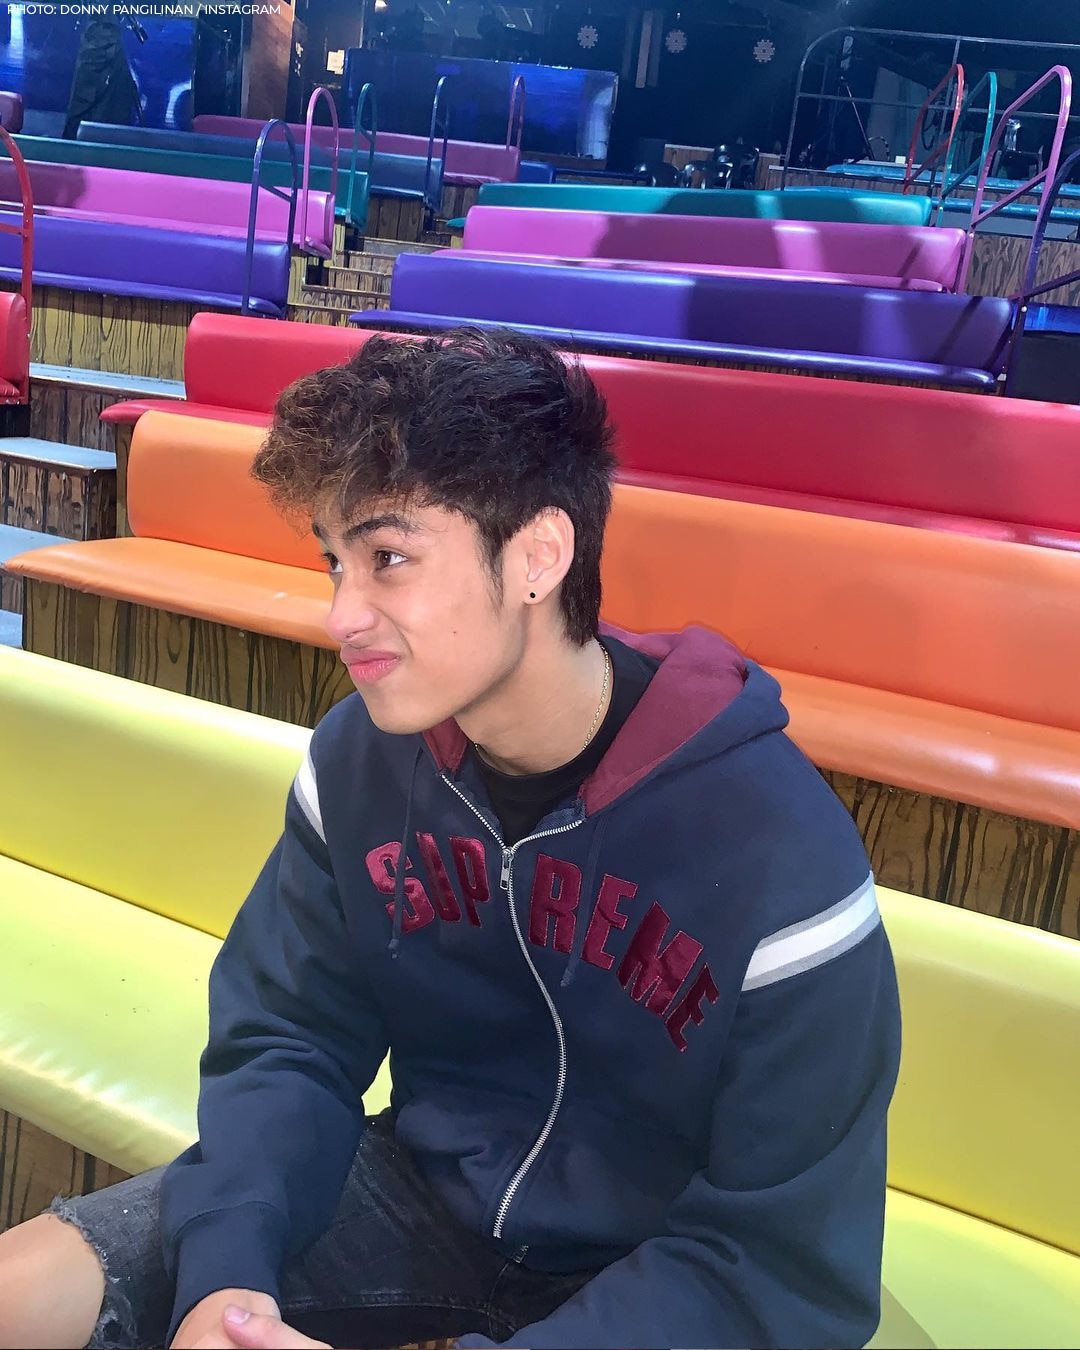 photo of Donny Pangilinan that prove he's the perfect Deib Lohr in 'He's Into Her'